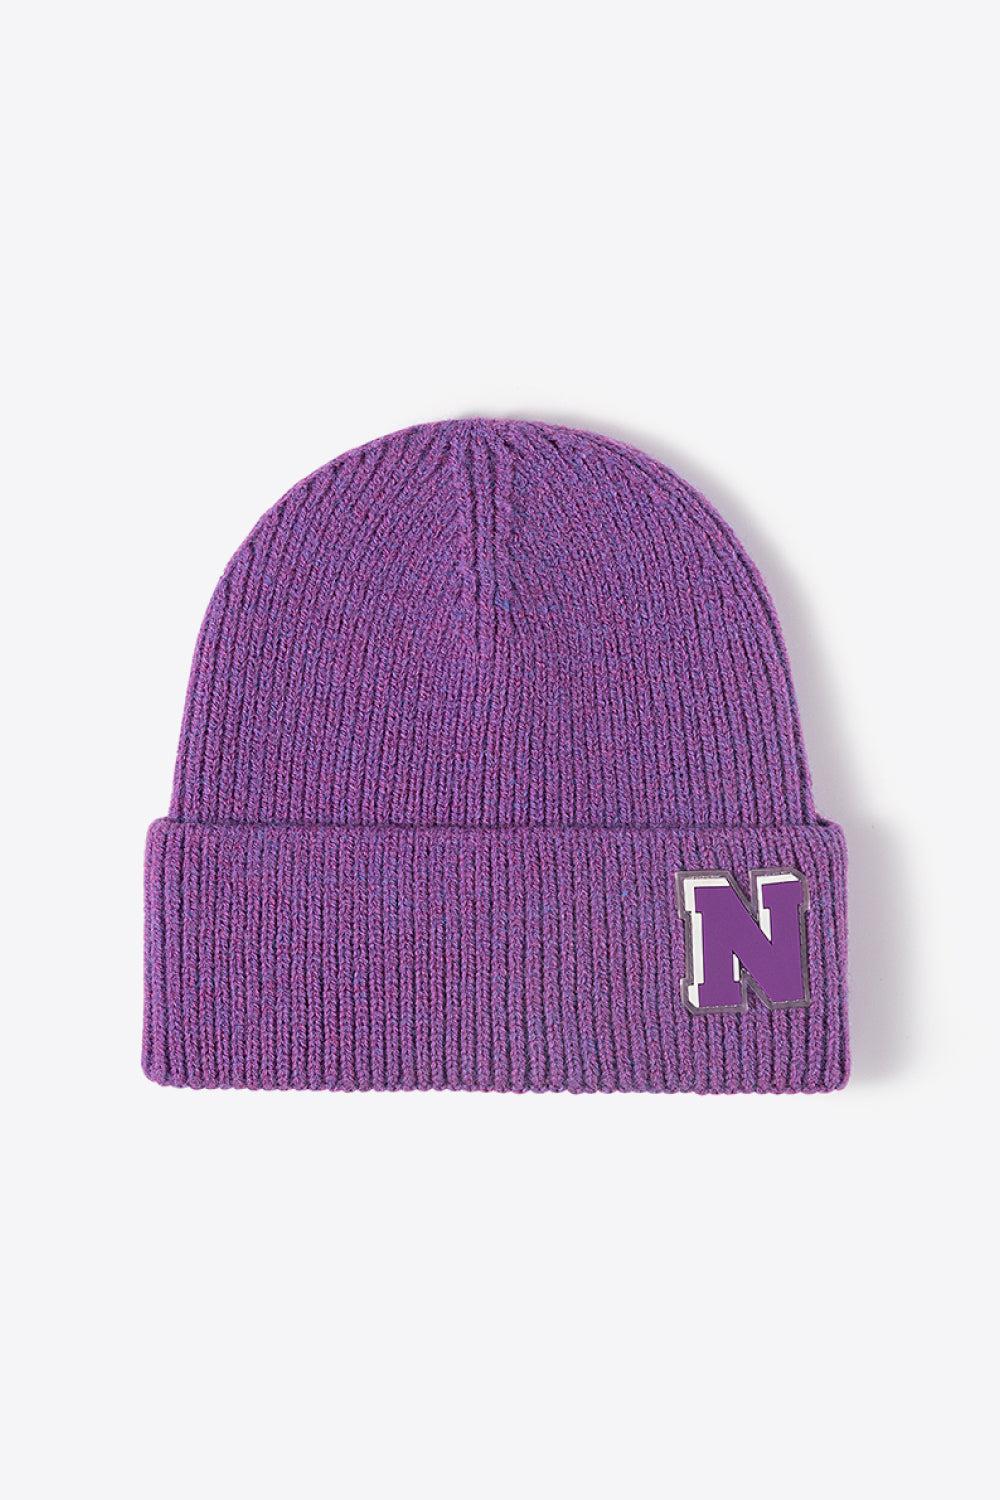 Letter N Patch Cuffed Knit Beanie-[Adult]-[Female]-Purple-One Size-2022 Online Blue Zone Planet